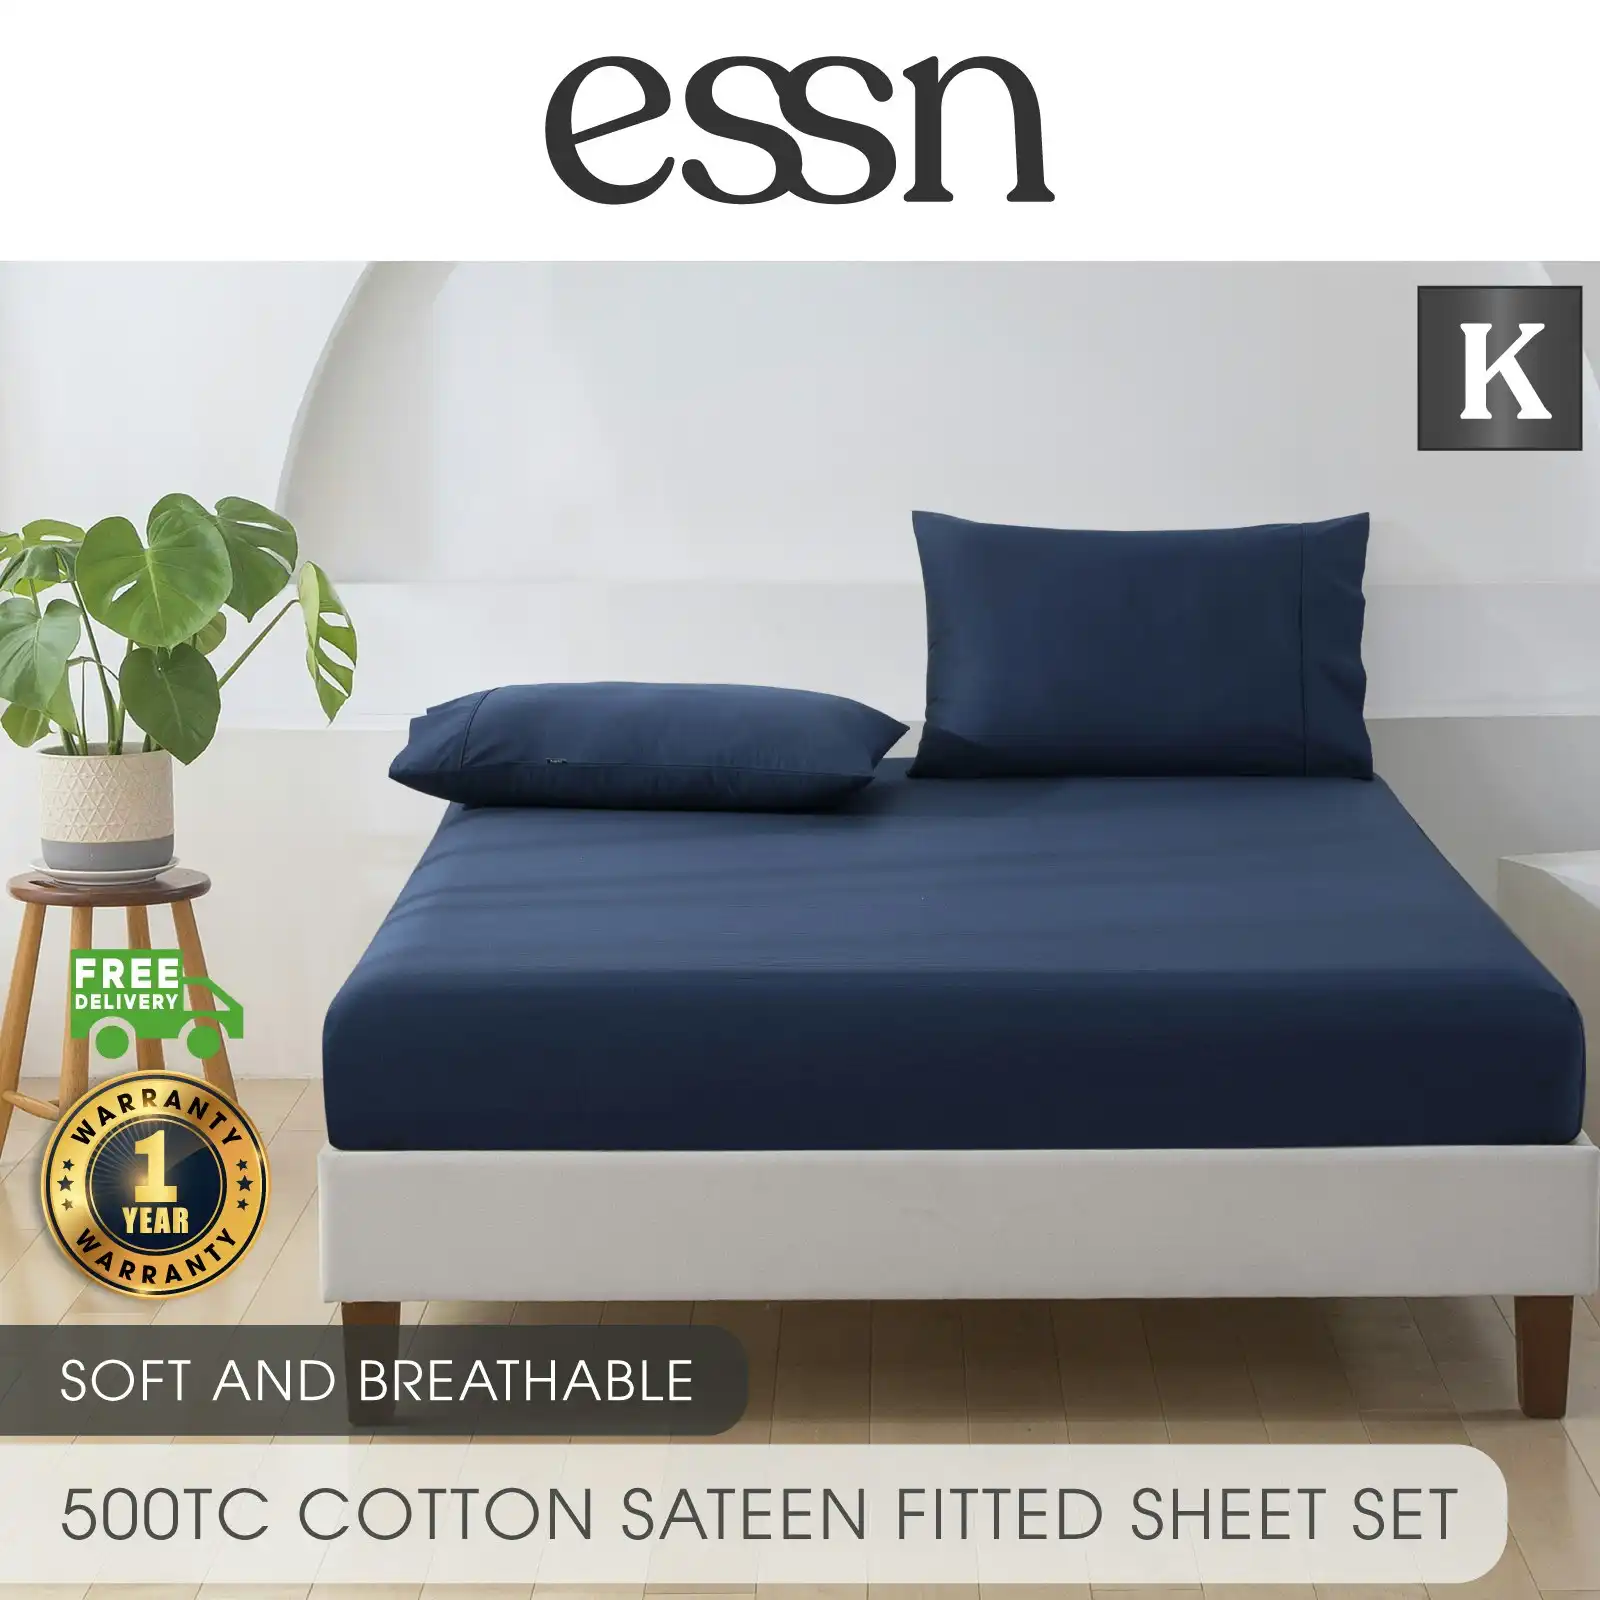 ESSN 500TC Cotton Sateen Fitted Sheet Set Navy King Bed